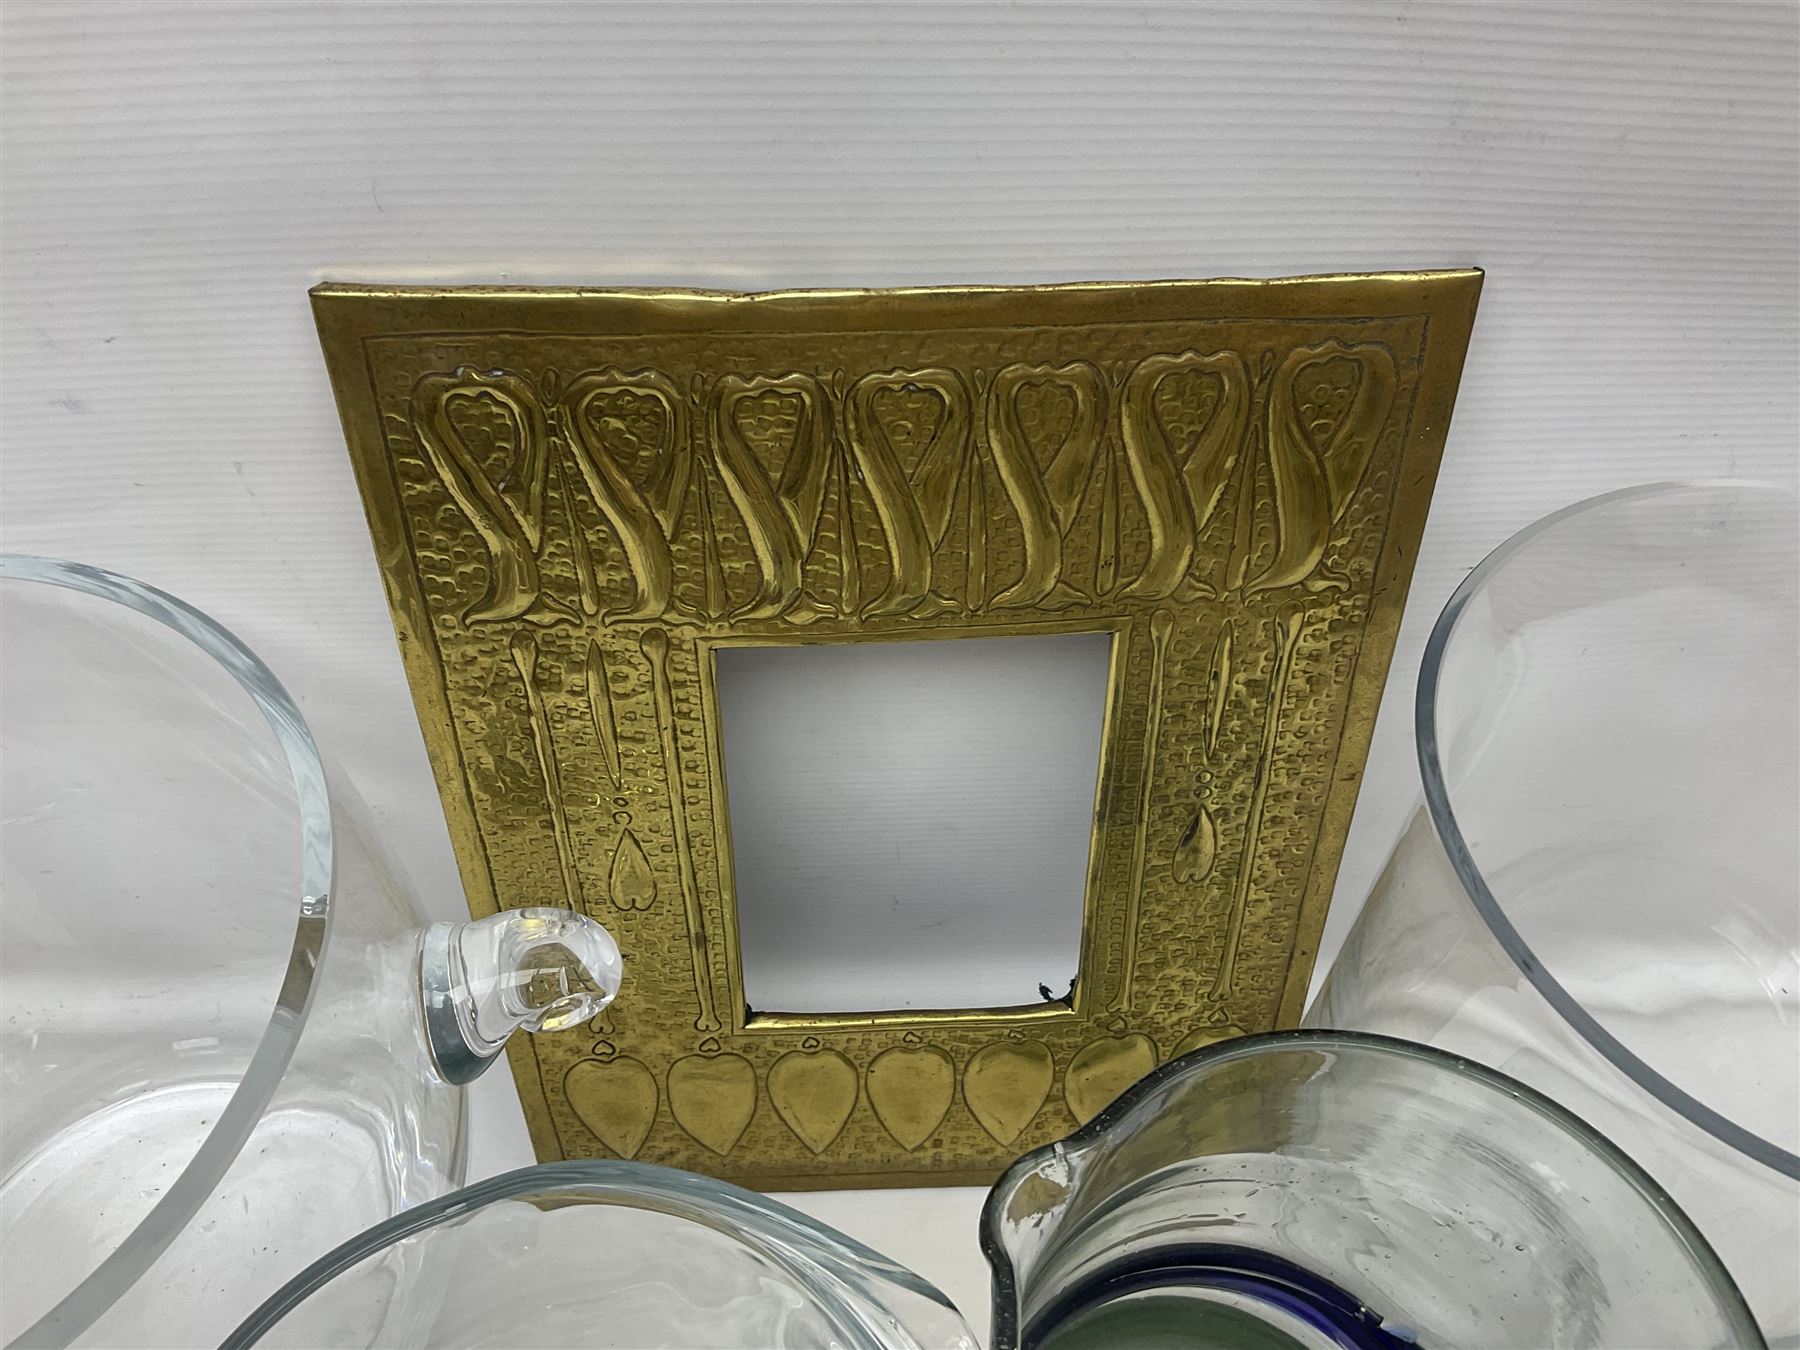 Art Nouveau style hammered brass frame - Image 6 of 7